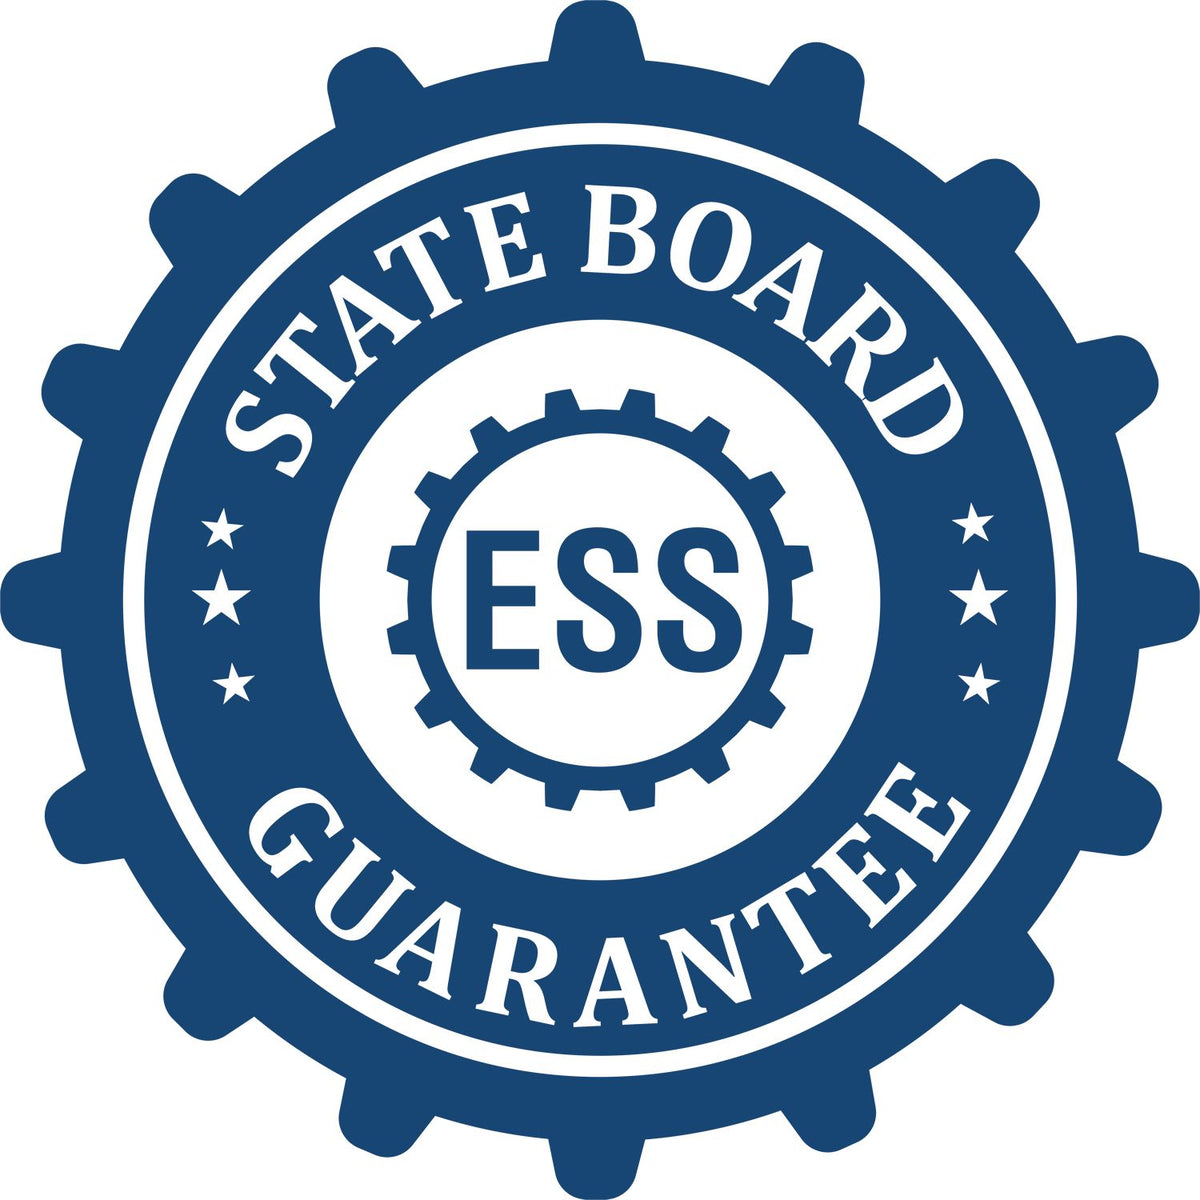 An emblem in a gear shape illustrating a state board guarantee for the Wooden Handle South Carolina State Seal Notary Public Stamp product.